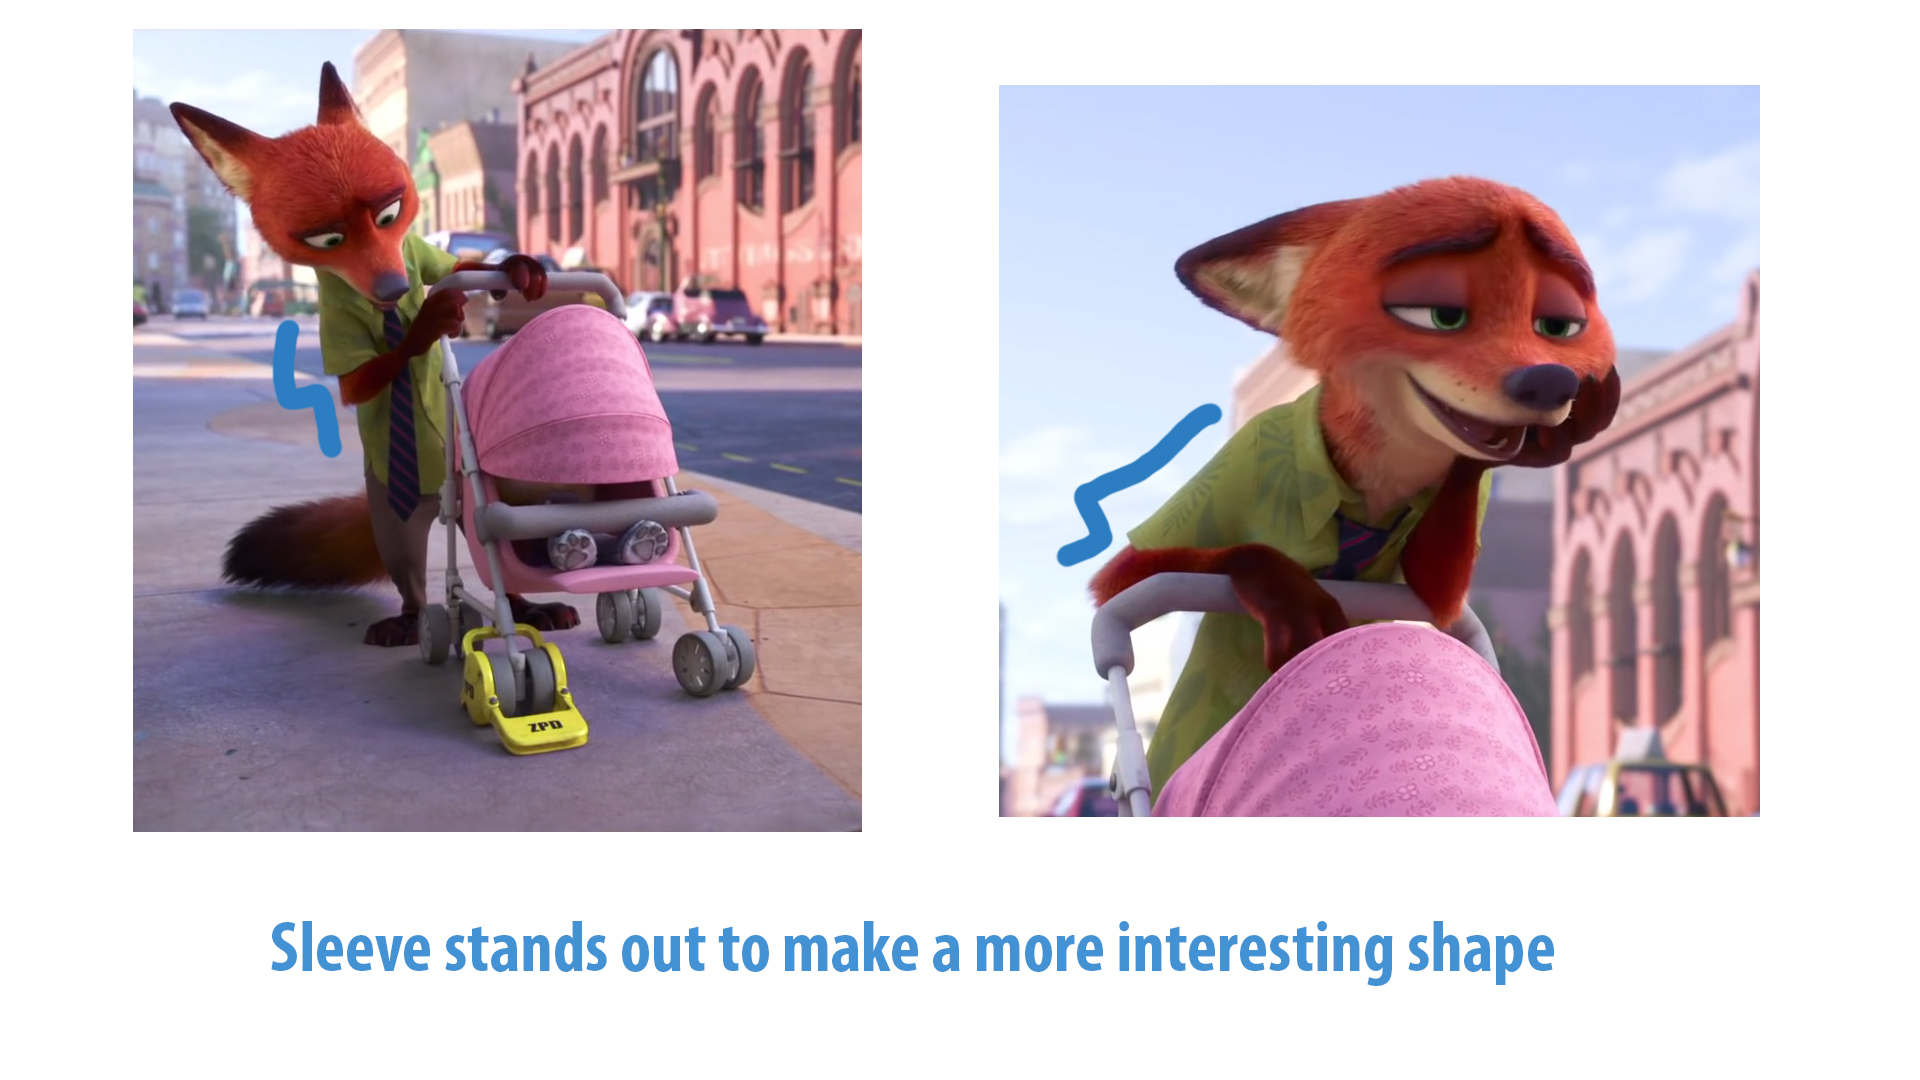 Why A Nick & Judy Romance In Zootopia 2 Is A Bad Idea - IMDb